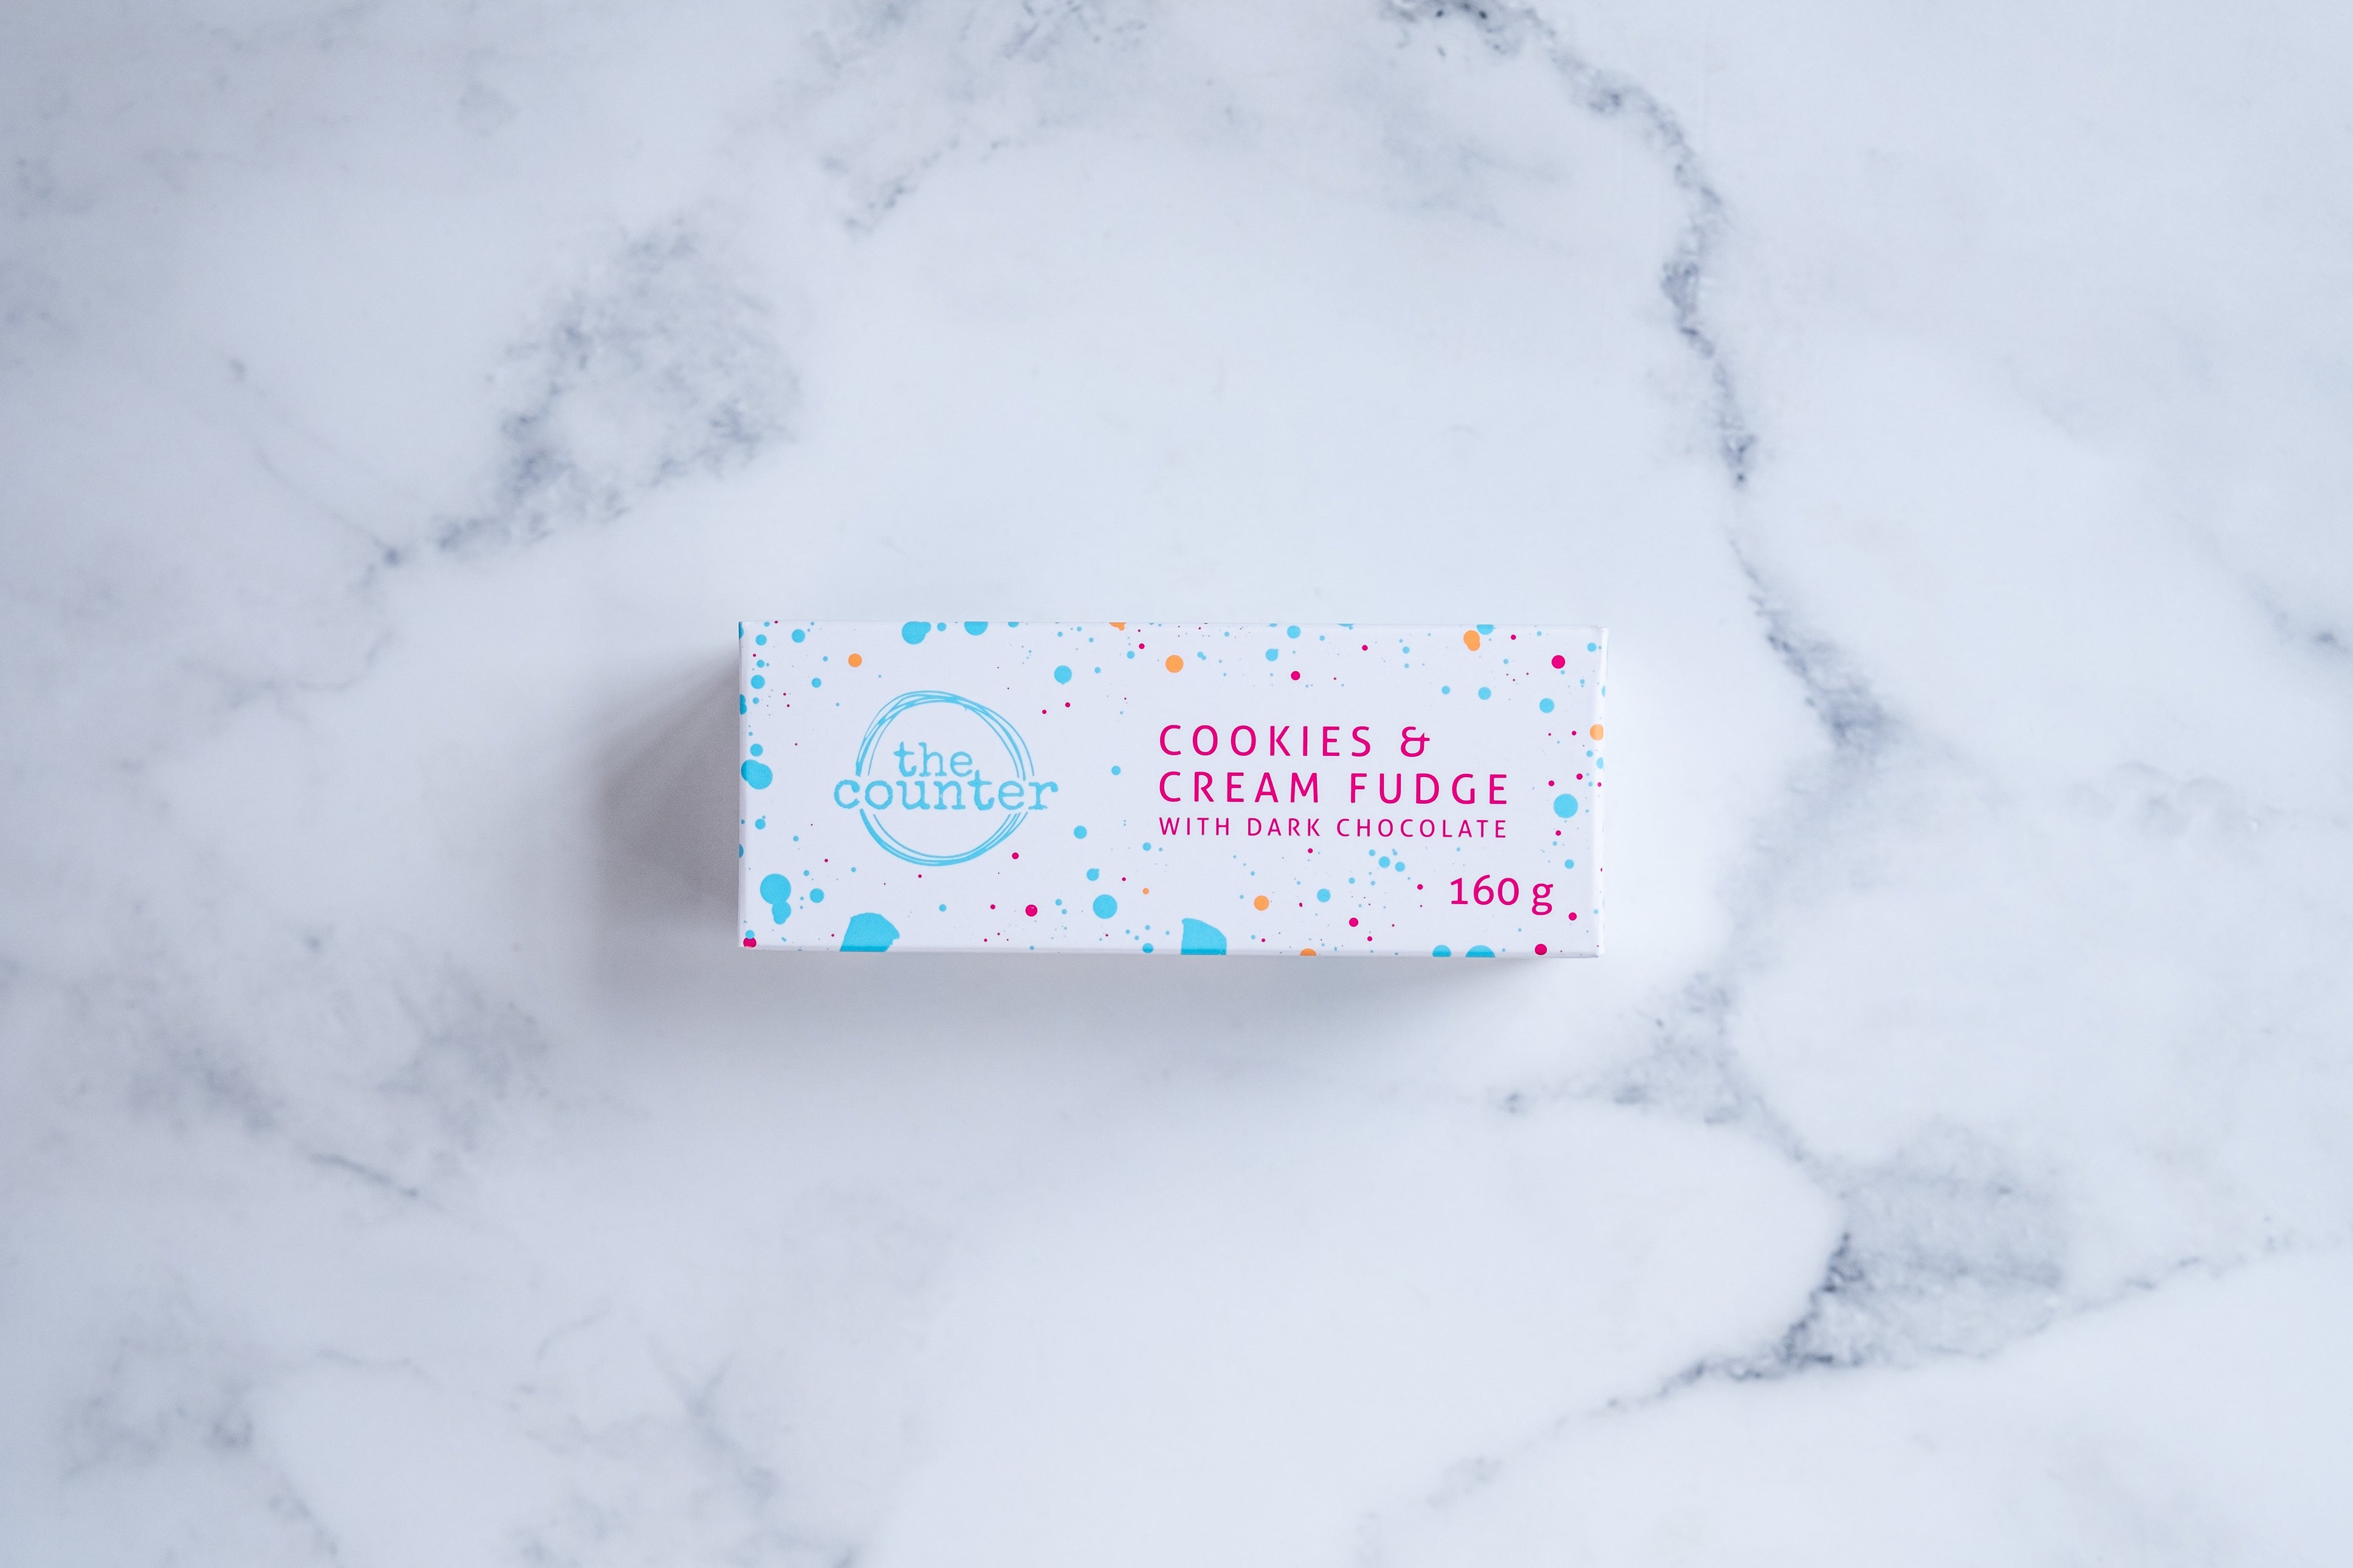 A white box sits on a neutral background. Paint splashes in bright blue and pink surround a messy circled logo for The Counter and the words 'Cookies & Cream fudge with dark chocolate' are written in cerise pink block lettering.